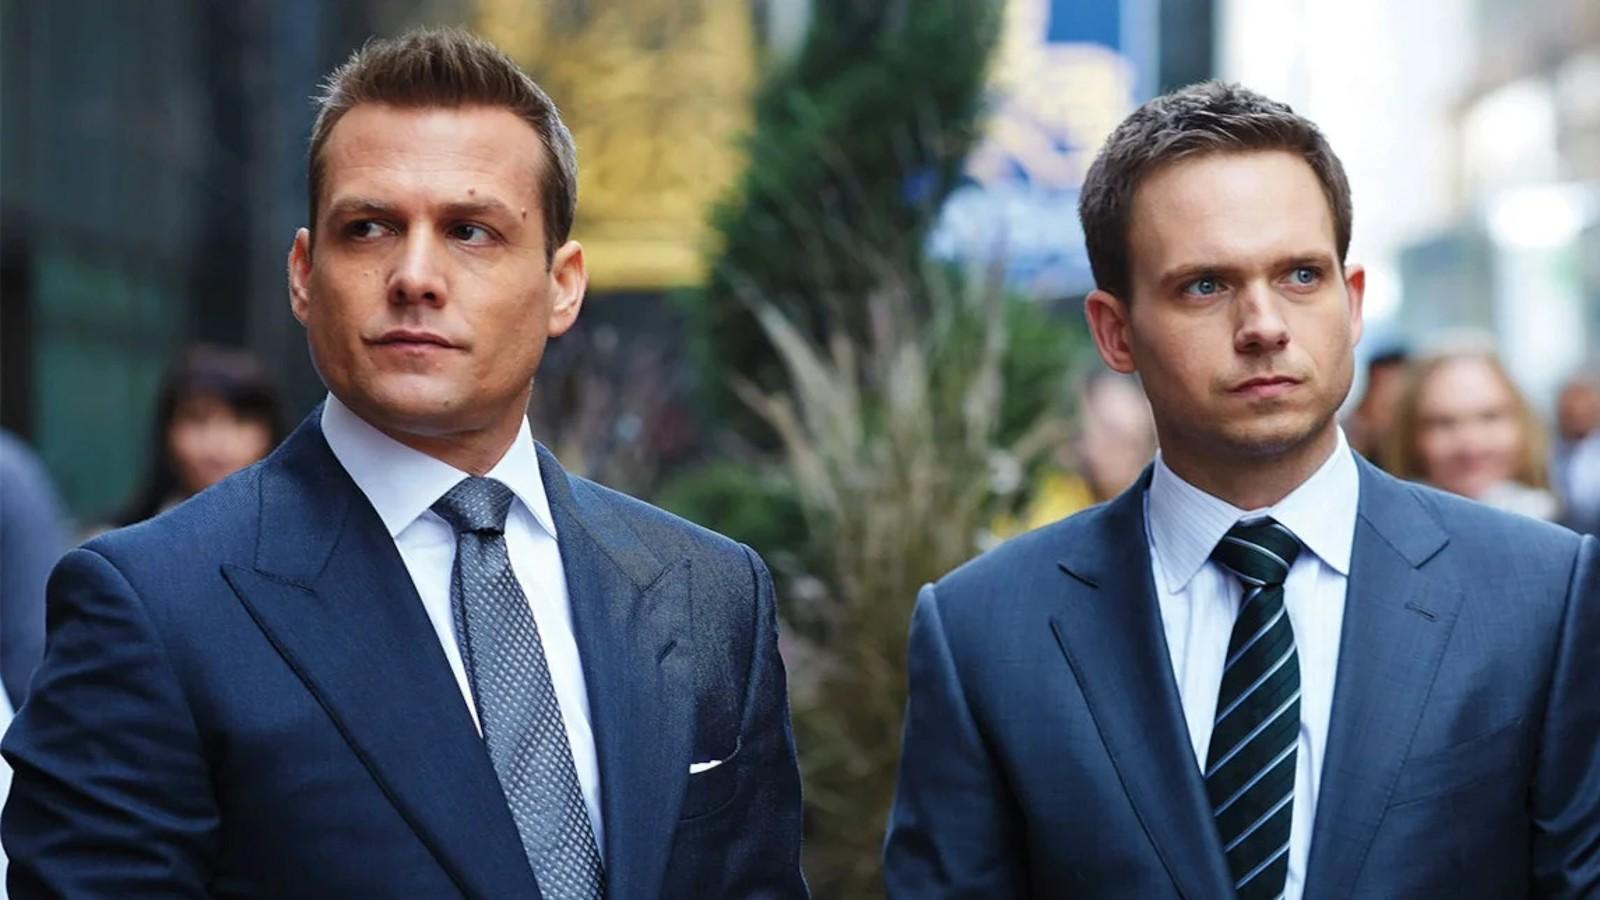 Gabriel Macht and Patrick J. Anderson as lawyers in Suits.